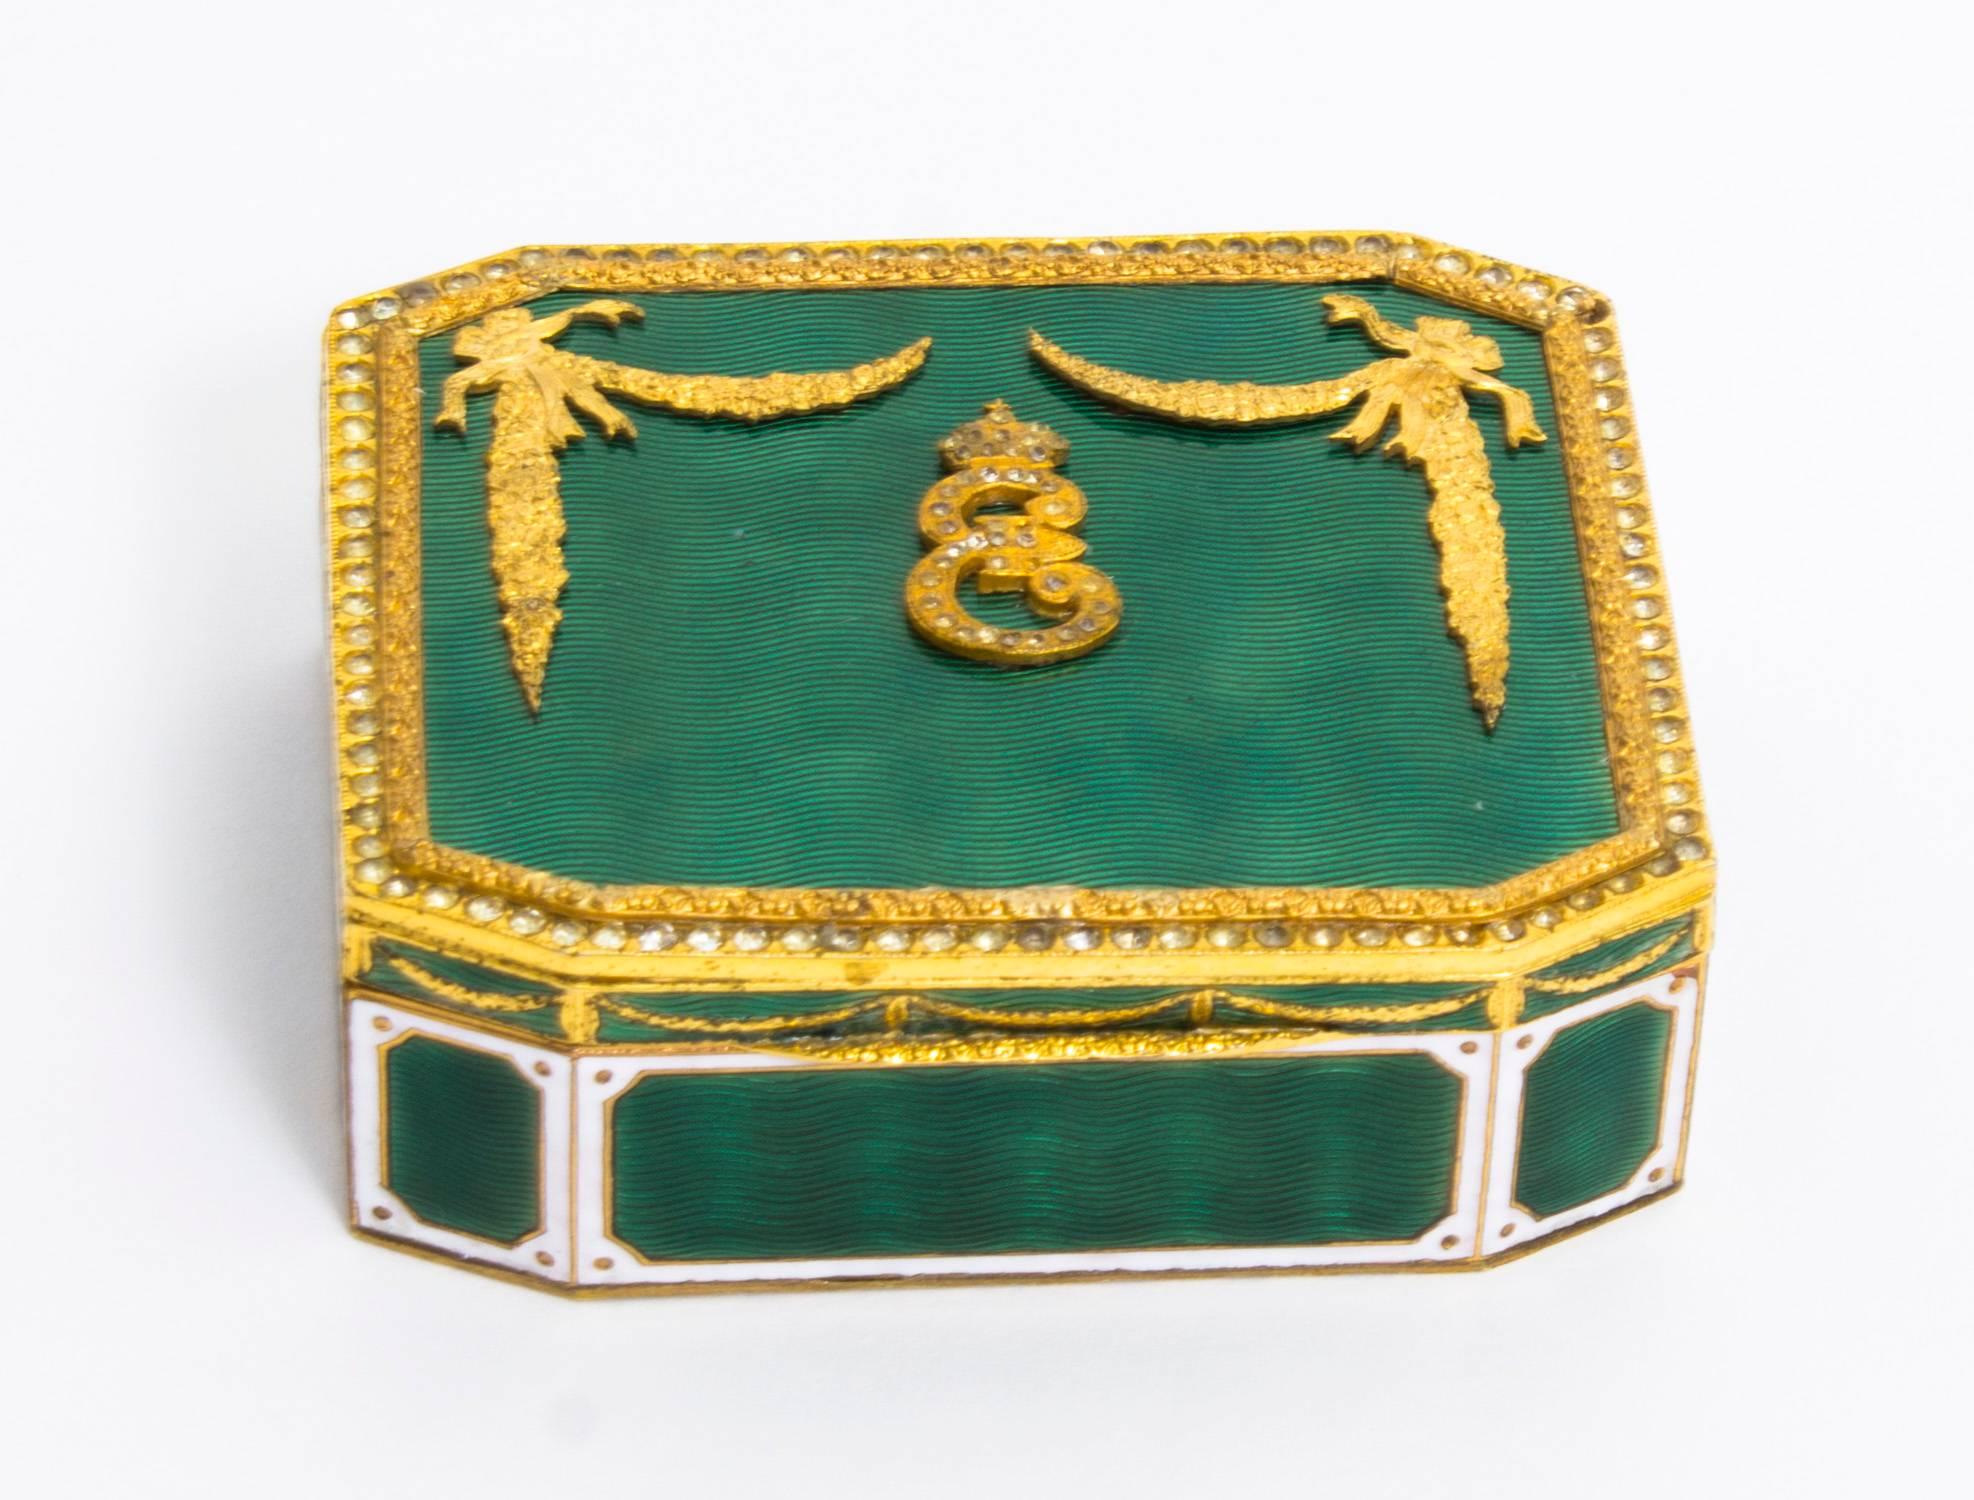 This is a lovely antique Napoleon III gilt ormolu and green and white enamel rectangular trinket box, late 18th Century in date. 

The lid bears a superb Royal Monogramme, the letter E topped with a crown framed by two foliate ribbon corners. The